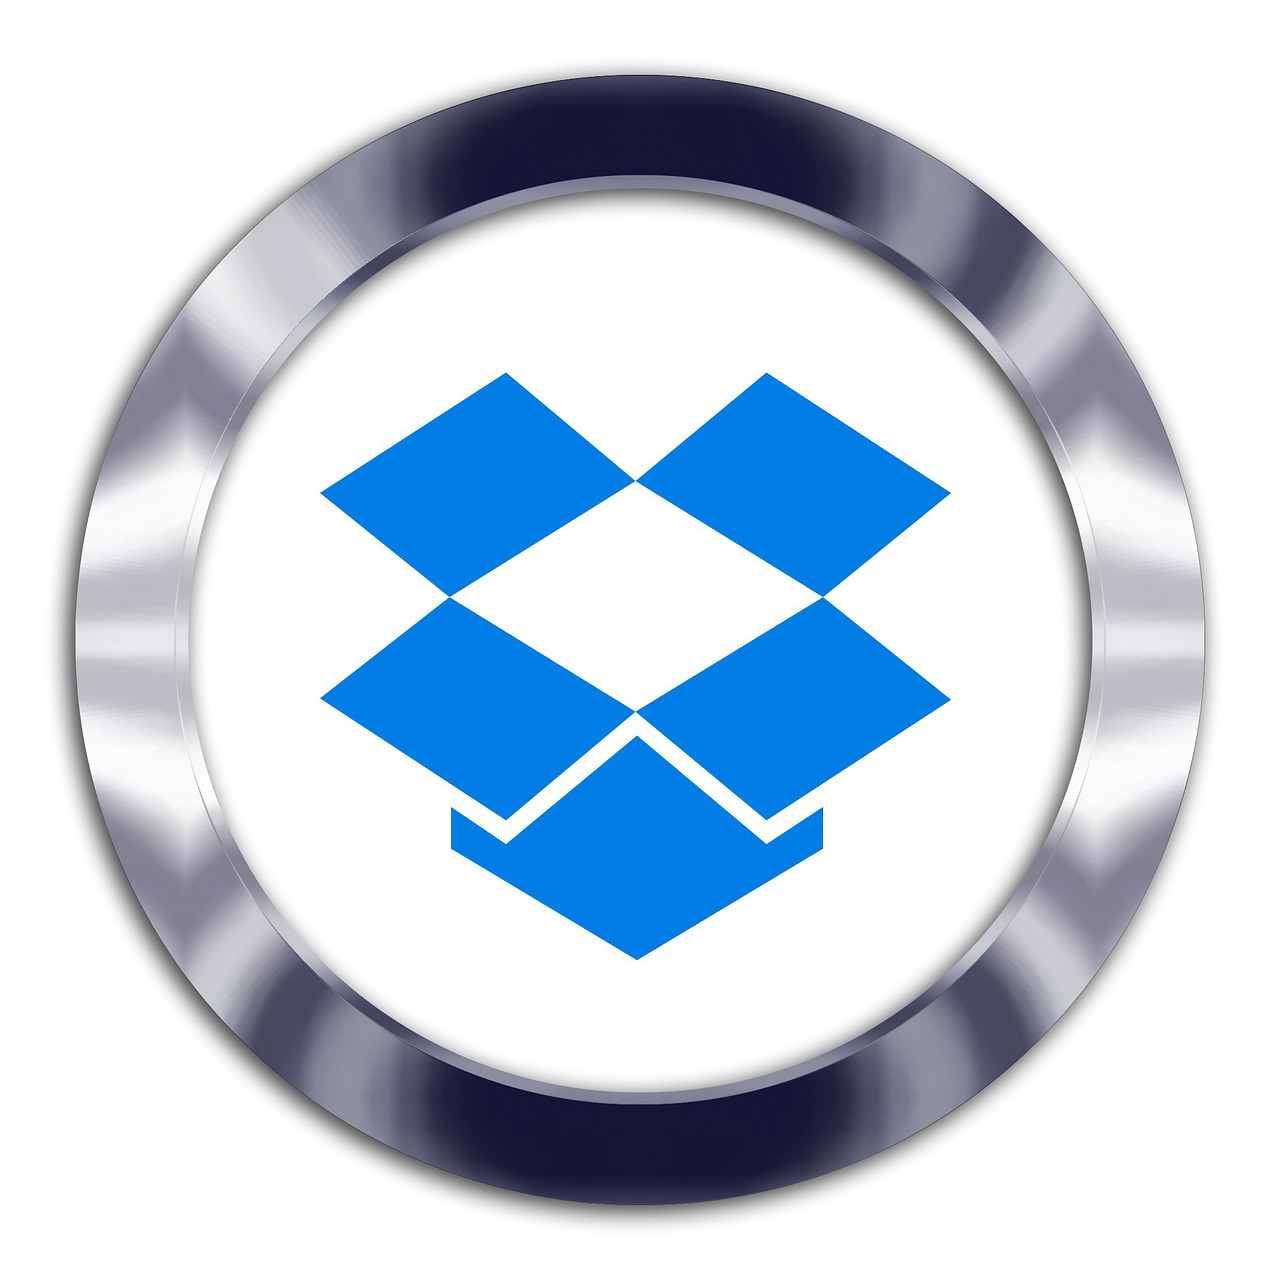 How does Dropbox work